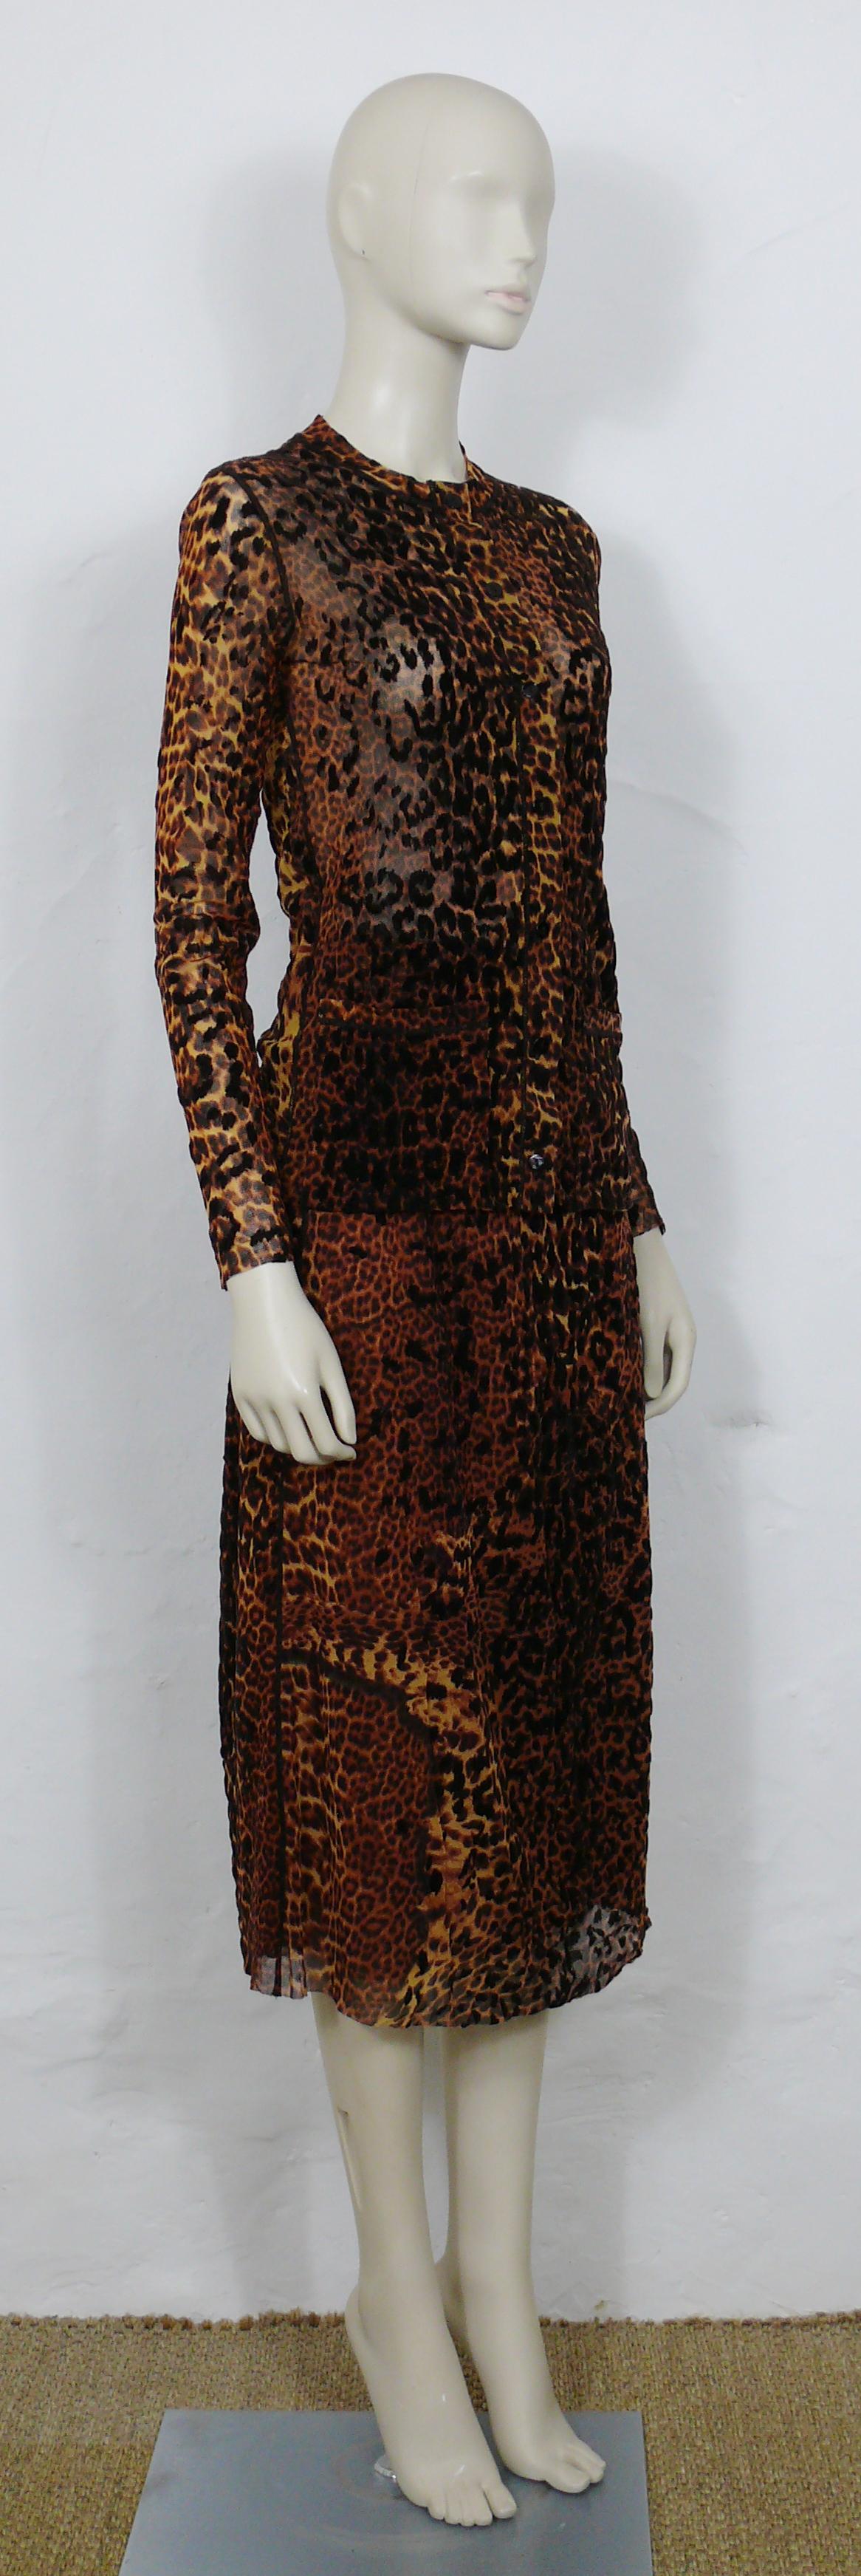 JEAN PAUL GAULTIER FUZZI sheer mesh cheetah print ensemble including a cardigan and a skirt.

CARDIGAN features :
- FUZZI sheer mesh cheetah print fabric with flocked velvet.
- Front button down closure.
- Visible stitching.
- Long sleeves.
- Two